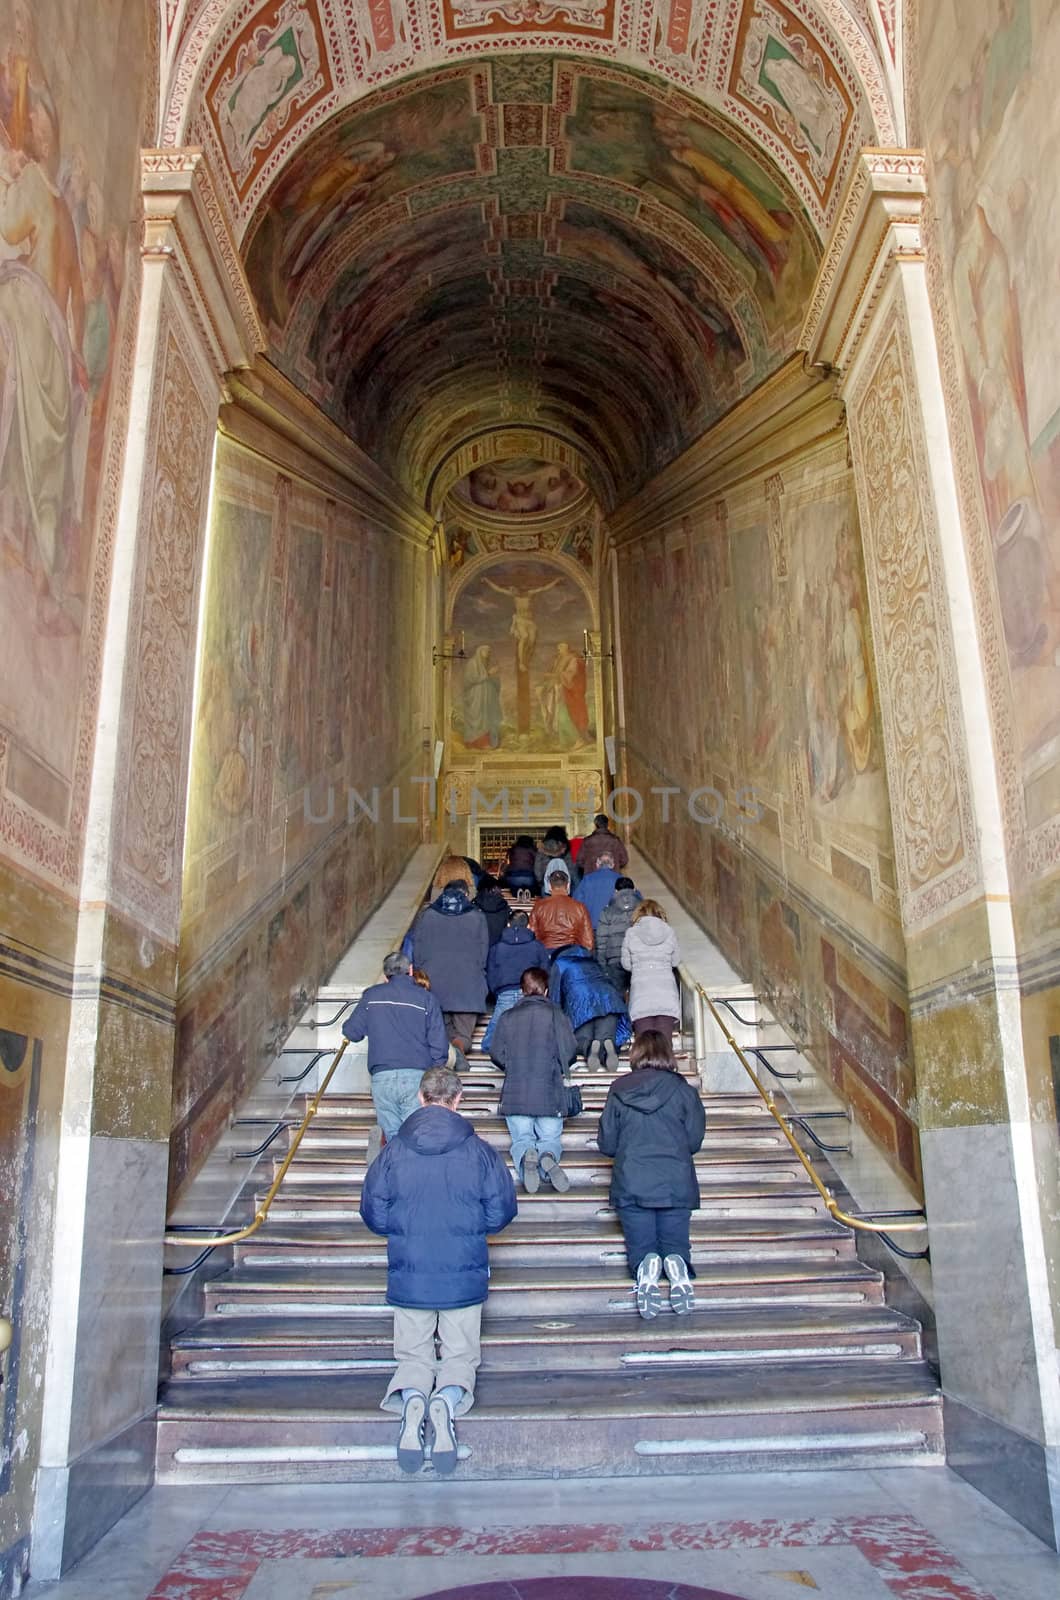 ROME, ITALY - MARCH 10: Holy Stairs (Scala Santa) in Rome on March 10, 2011 in Rome, Italy